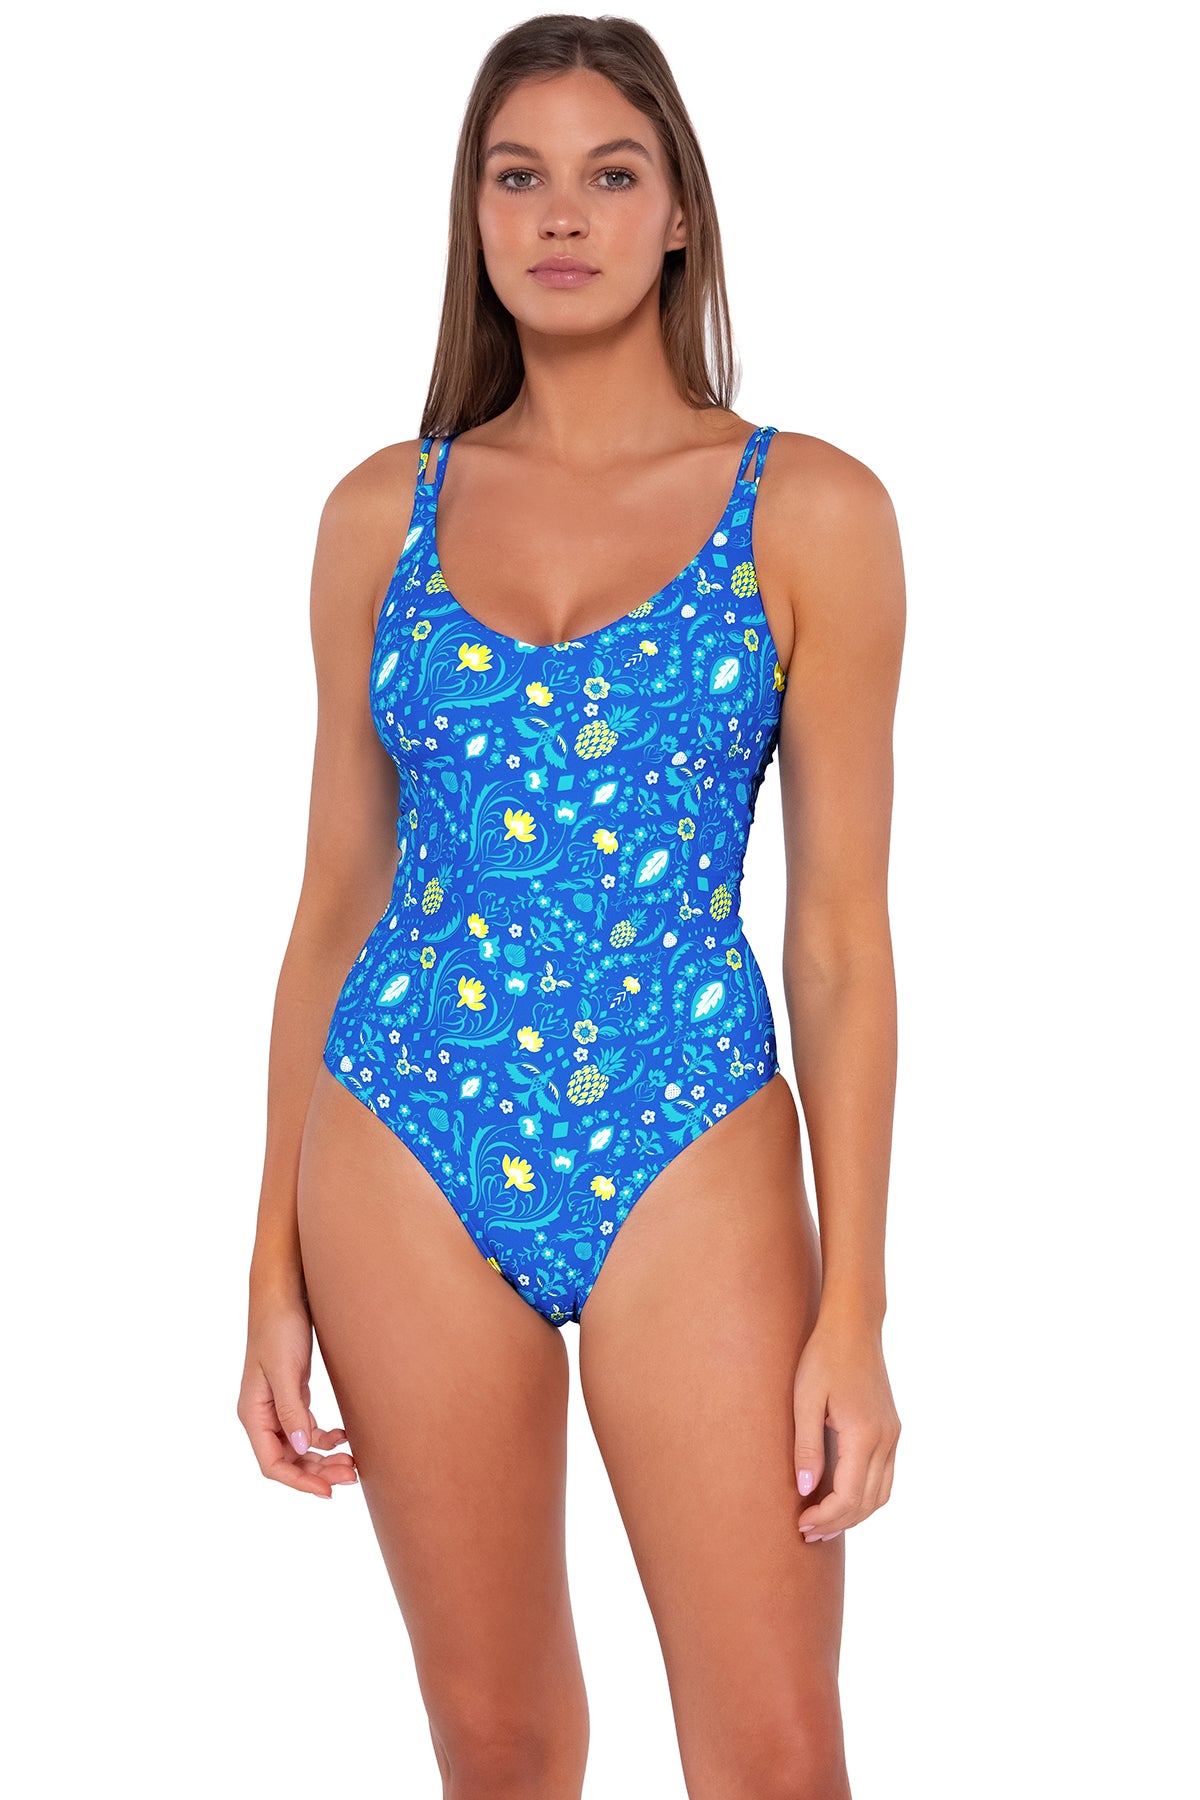 Front pose #1 of Daria wearing Sunsets Pineapple Grove Veronica One Piece